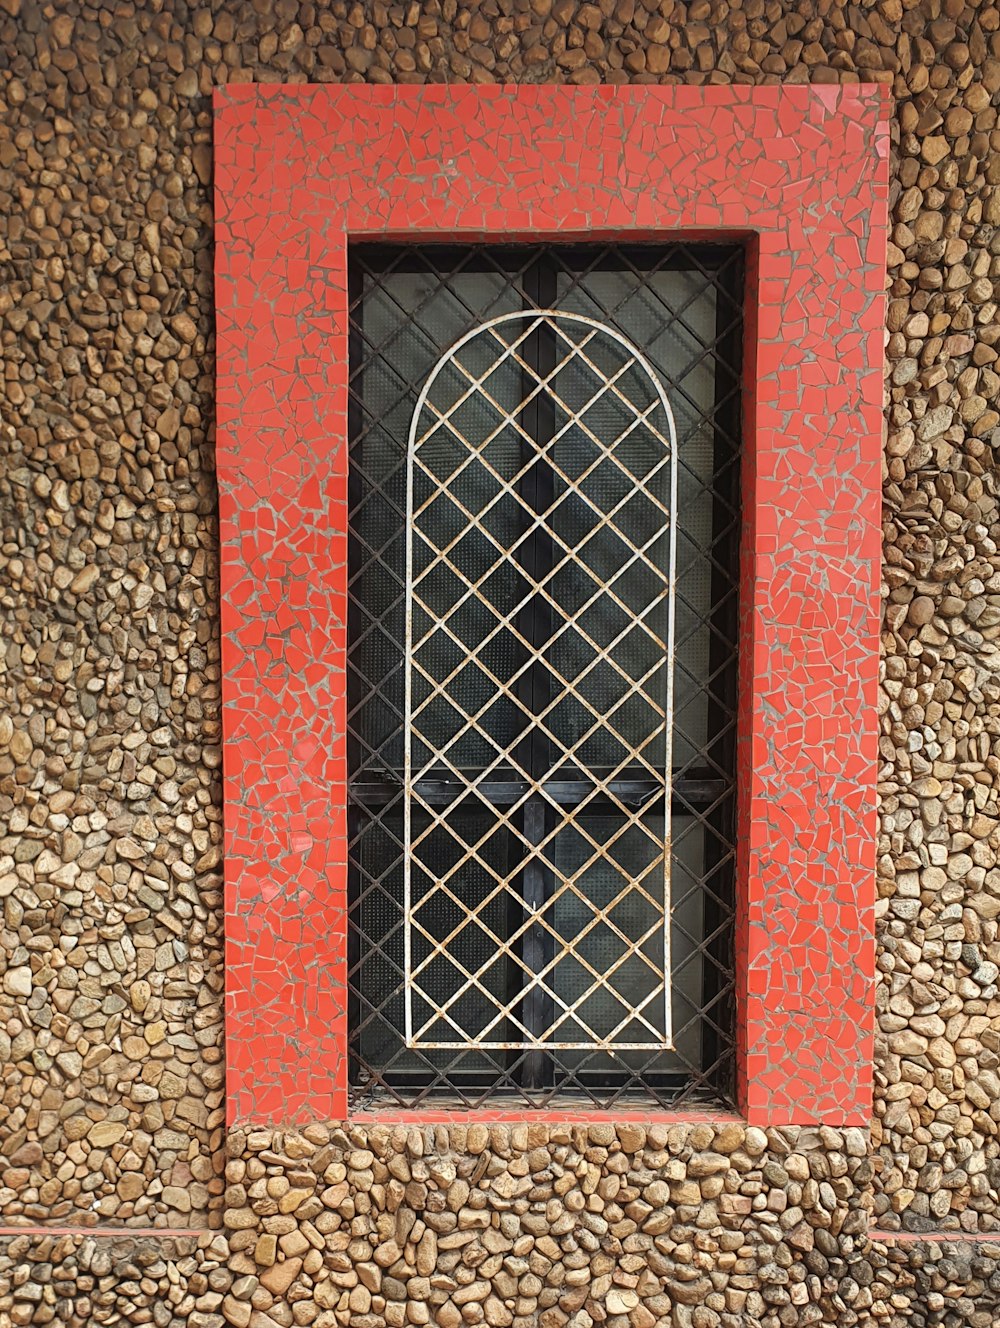 a stone wall with a red window and a black window pane